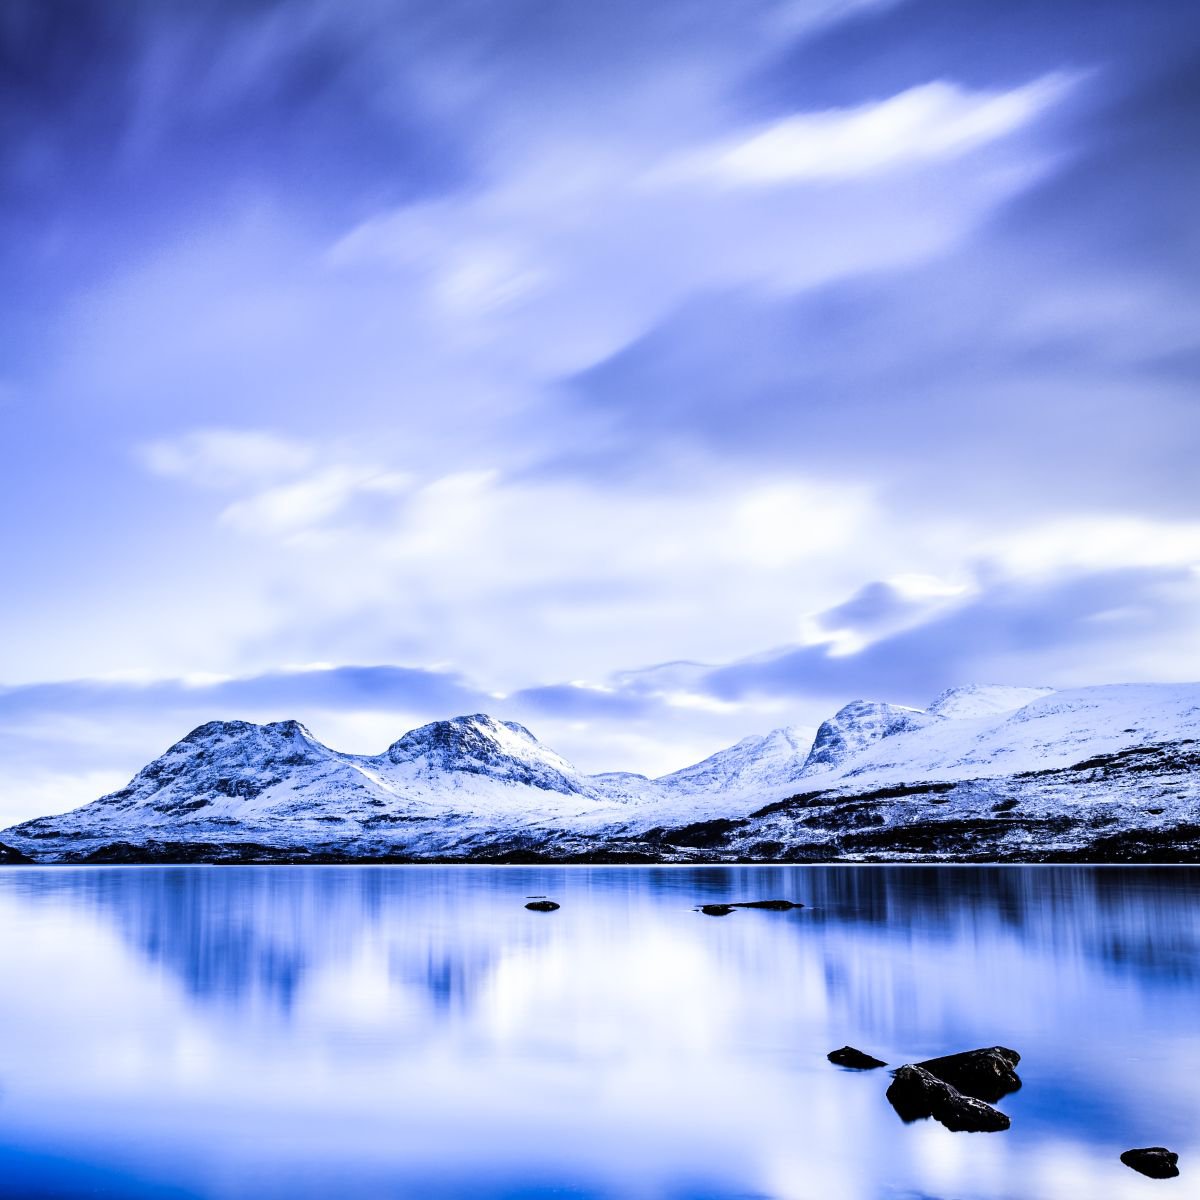 Assynt Blues - Blue and White - Snow and Ice - Winter in the Scottish Highlands by Lynne Douglas